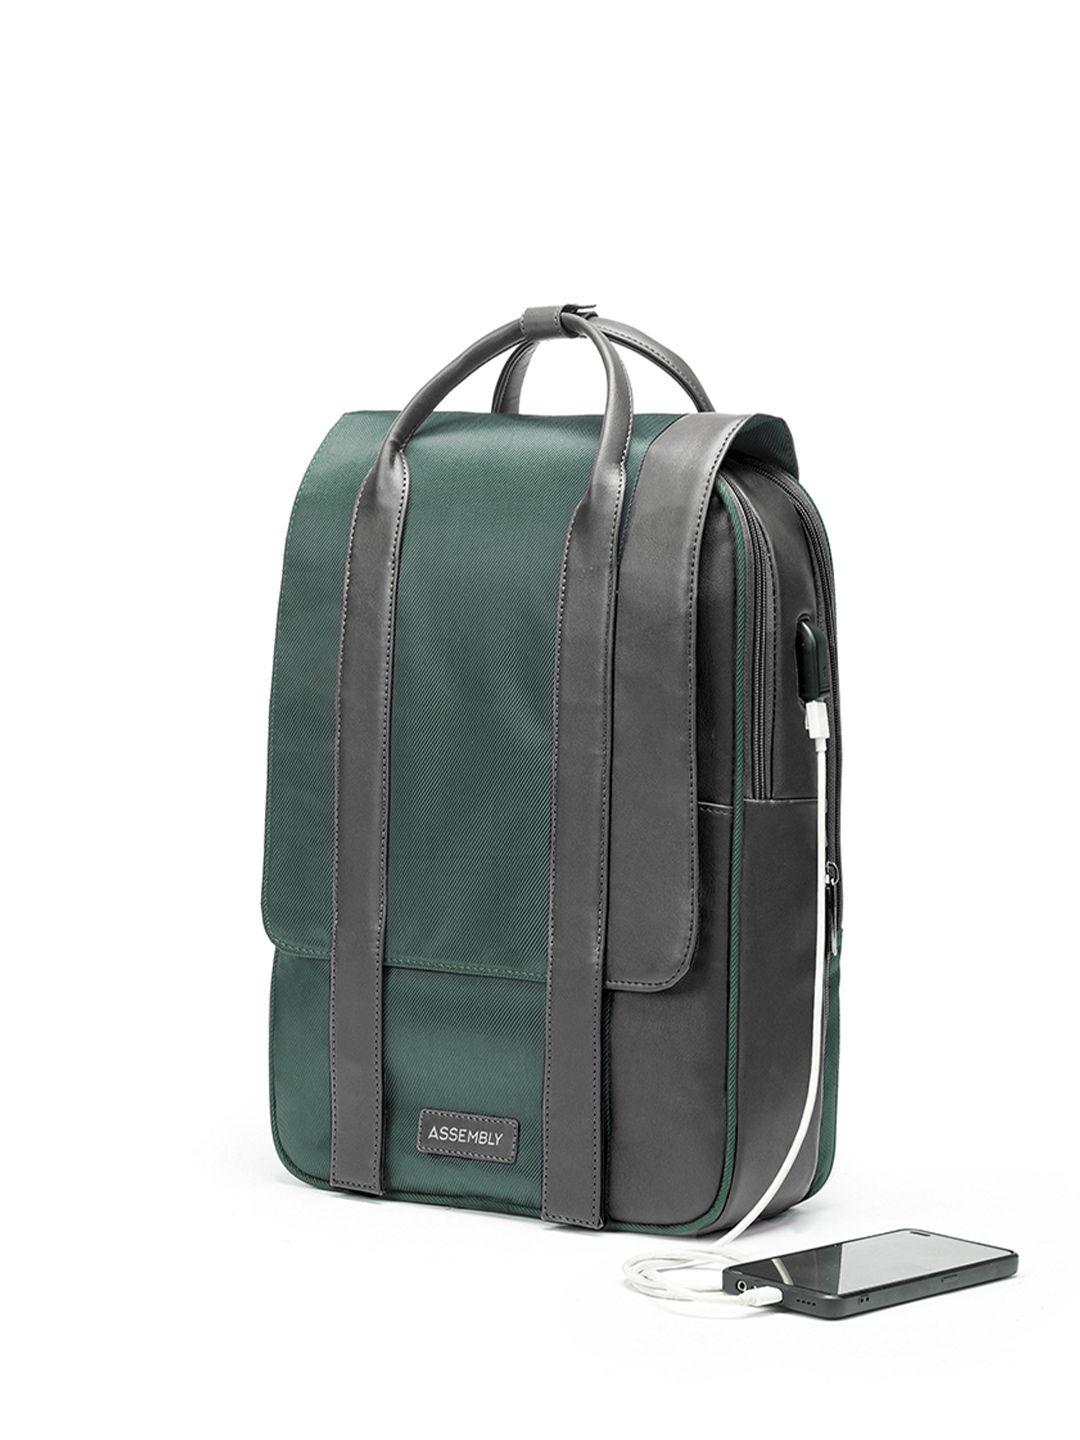 assembly unisex green & grey backpack with usb charging port